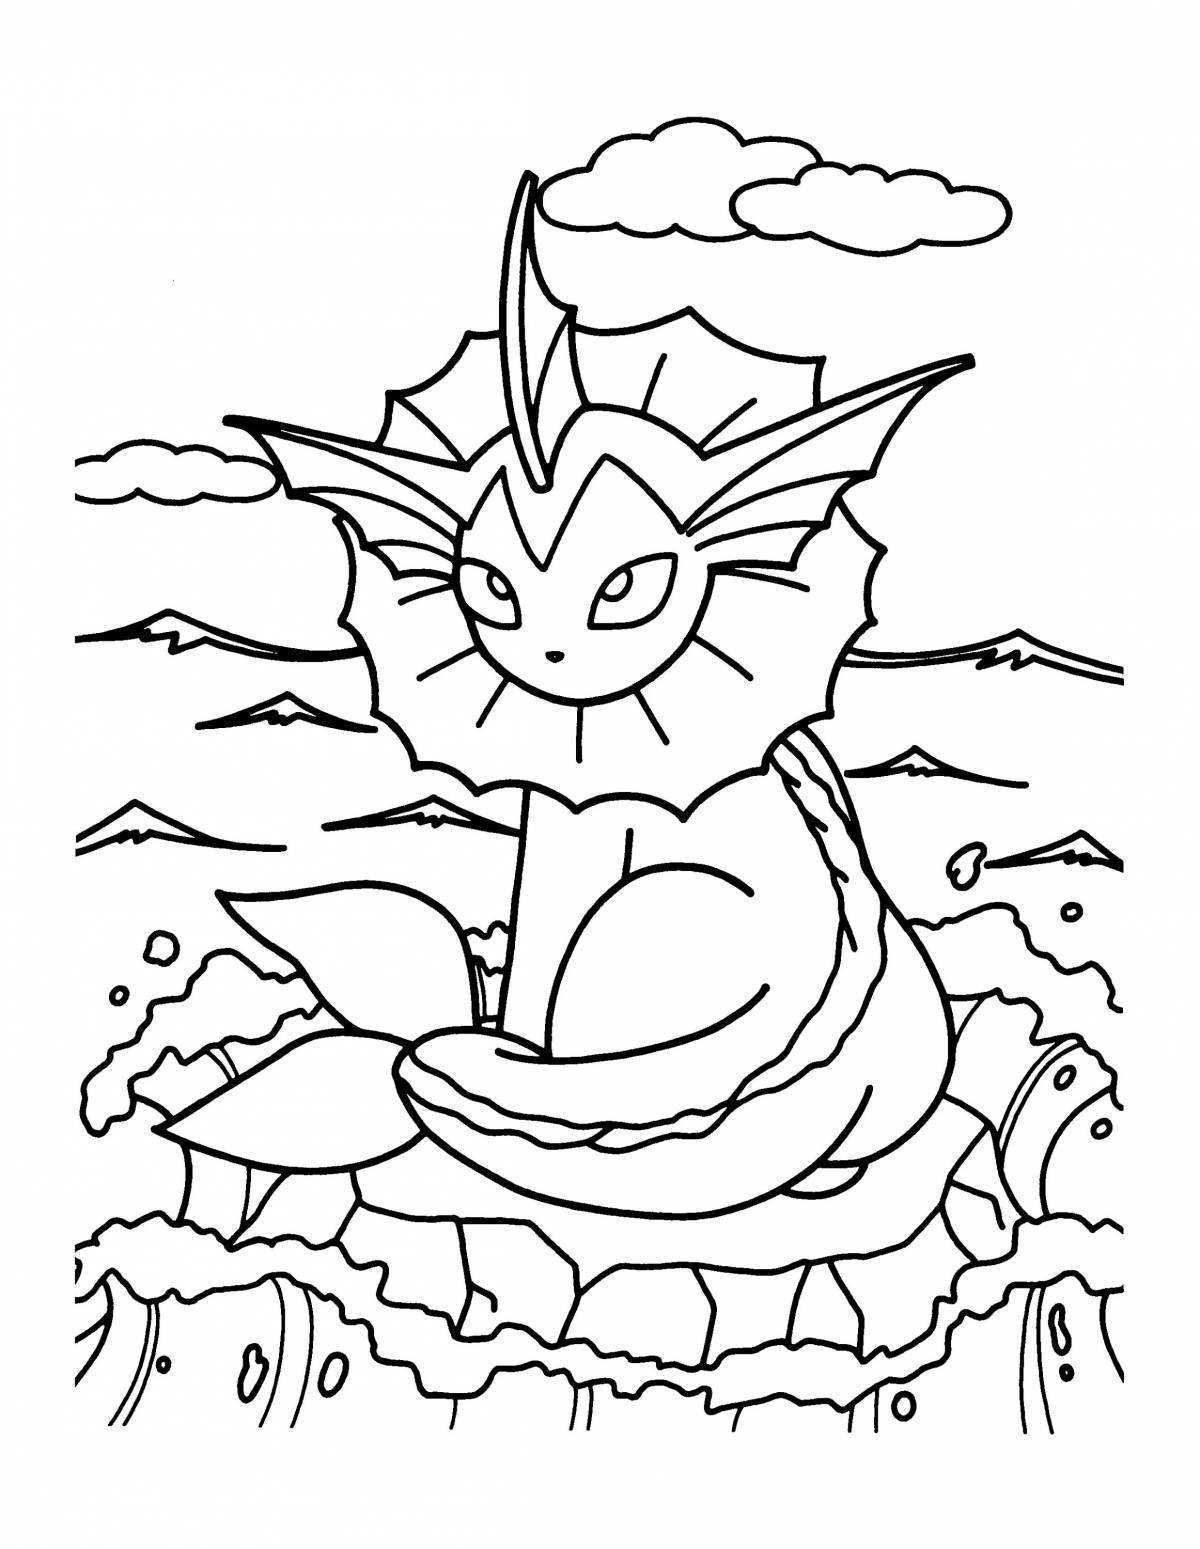 Outstanding pokemon coloring book for kids